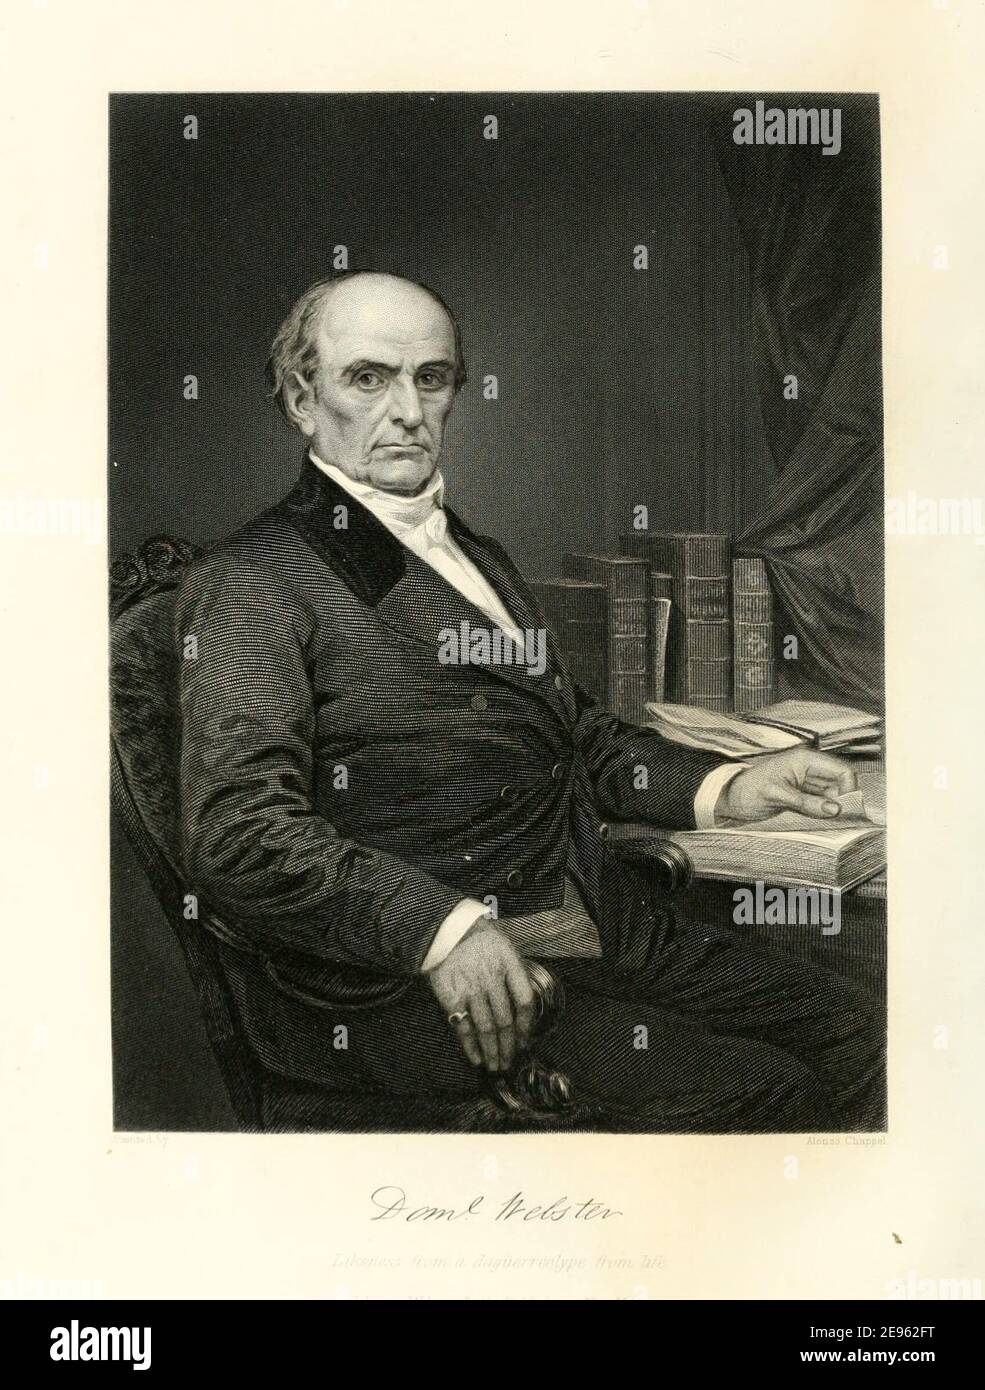 Engraved portrait based on a daguerreotype of American lawyer and statesman Daniel Webster (1782 - 1852), 1874. Stock Photo